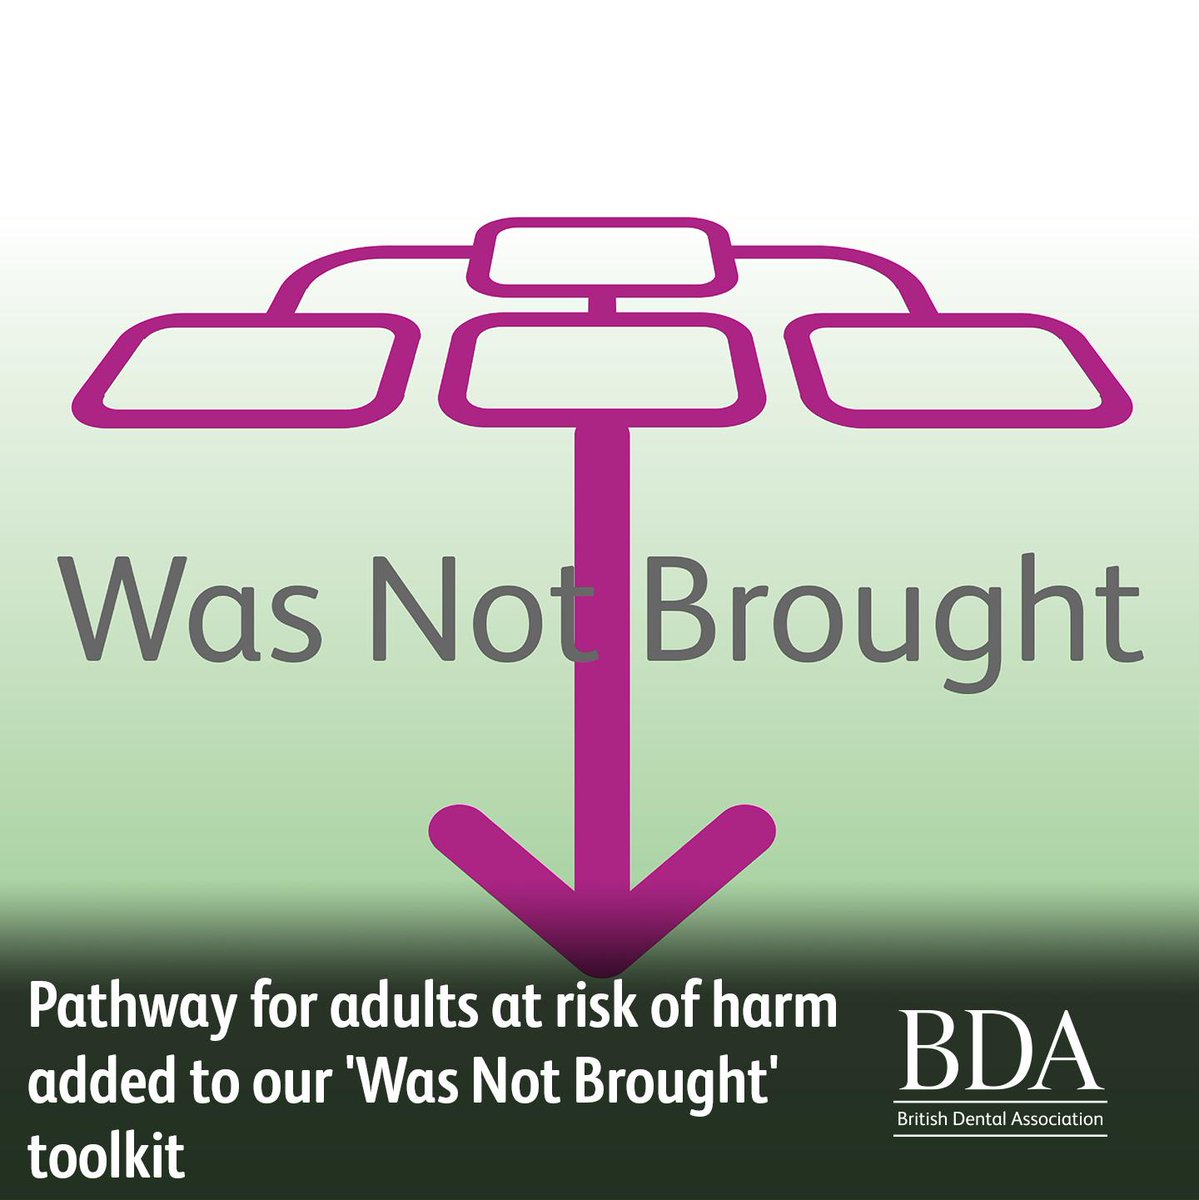 Our 'Was Not Brought' (WNB) toolkit has been further extended to help dental teams safeguard adults at risk of harm (AAR) if they miss dental appointments. Access it now: bit.ly/3wdQH8I